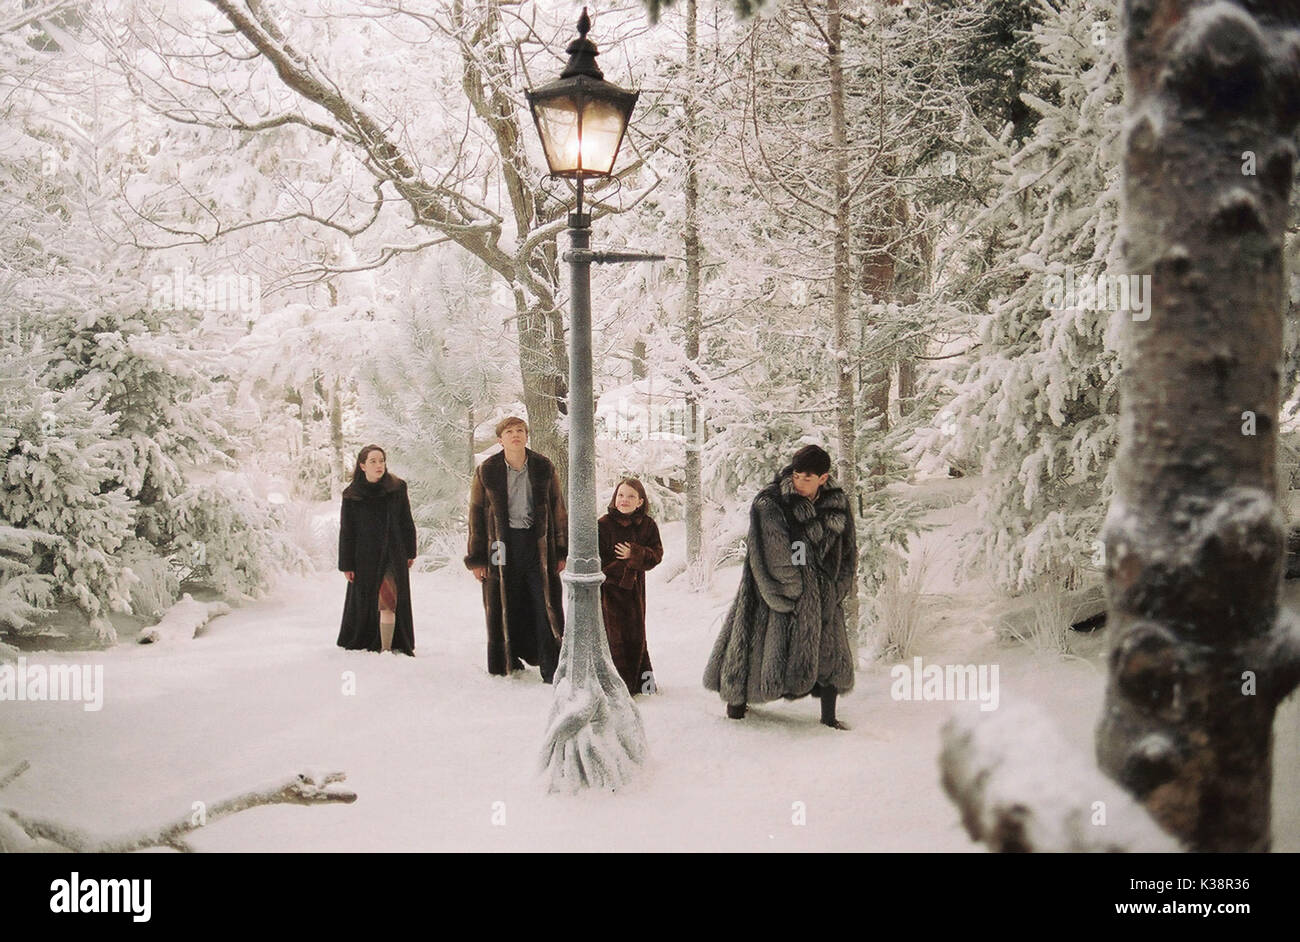 Pictured l-r: Susan , Peter (WILLIAM MOSELEY), Lucy (GEORGIE HENLEY), and Edmund (SKANDAR KEYNES) in a scene from THE CHRONICLES OF NARNIA: THE LION, THE WITCH AND THE WARDROBE, directed by Andrew Adamson.  Distributed by Buena Vista International. THIS MATERIAL MAY BE LAWFULLY USED IN ALL MEDIA, EXCLUDING THE INTERNET, ONLY TO PROMOTE THE RELEASE OF THE MOTION PICTURE ENTITLED THE CHRONICLES OF NARNIA: THE LIO Stock Photo